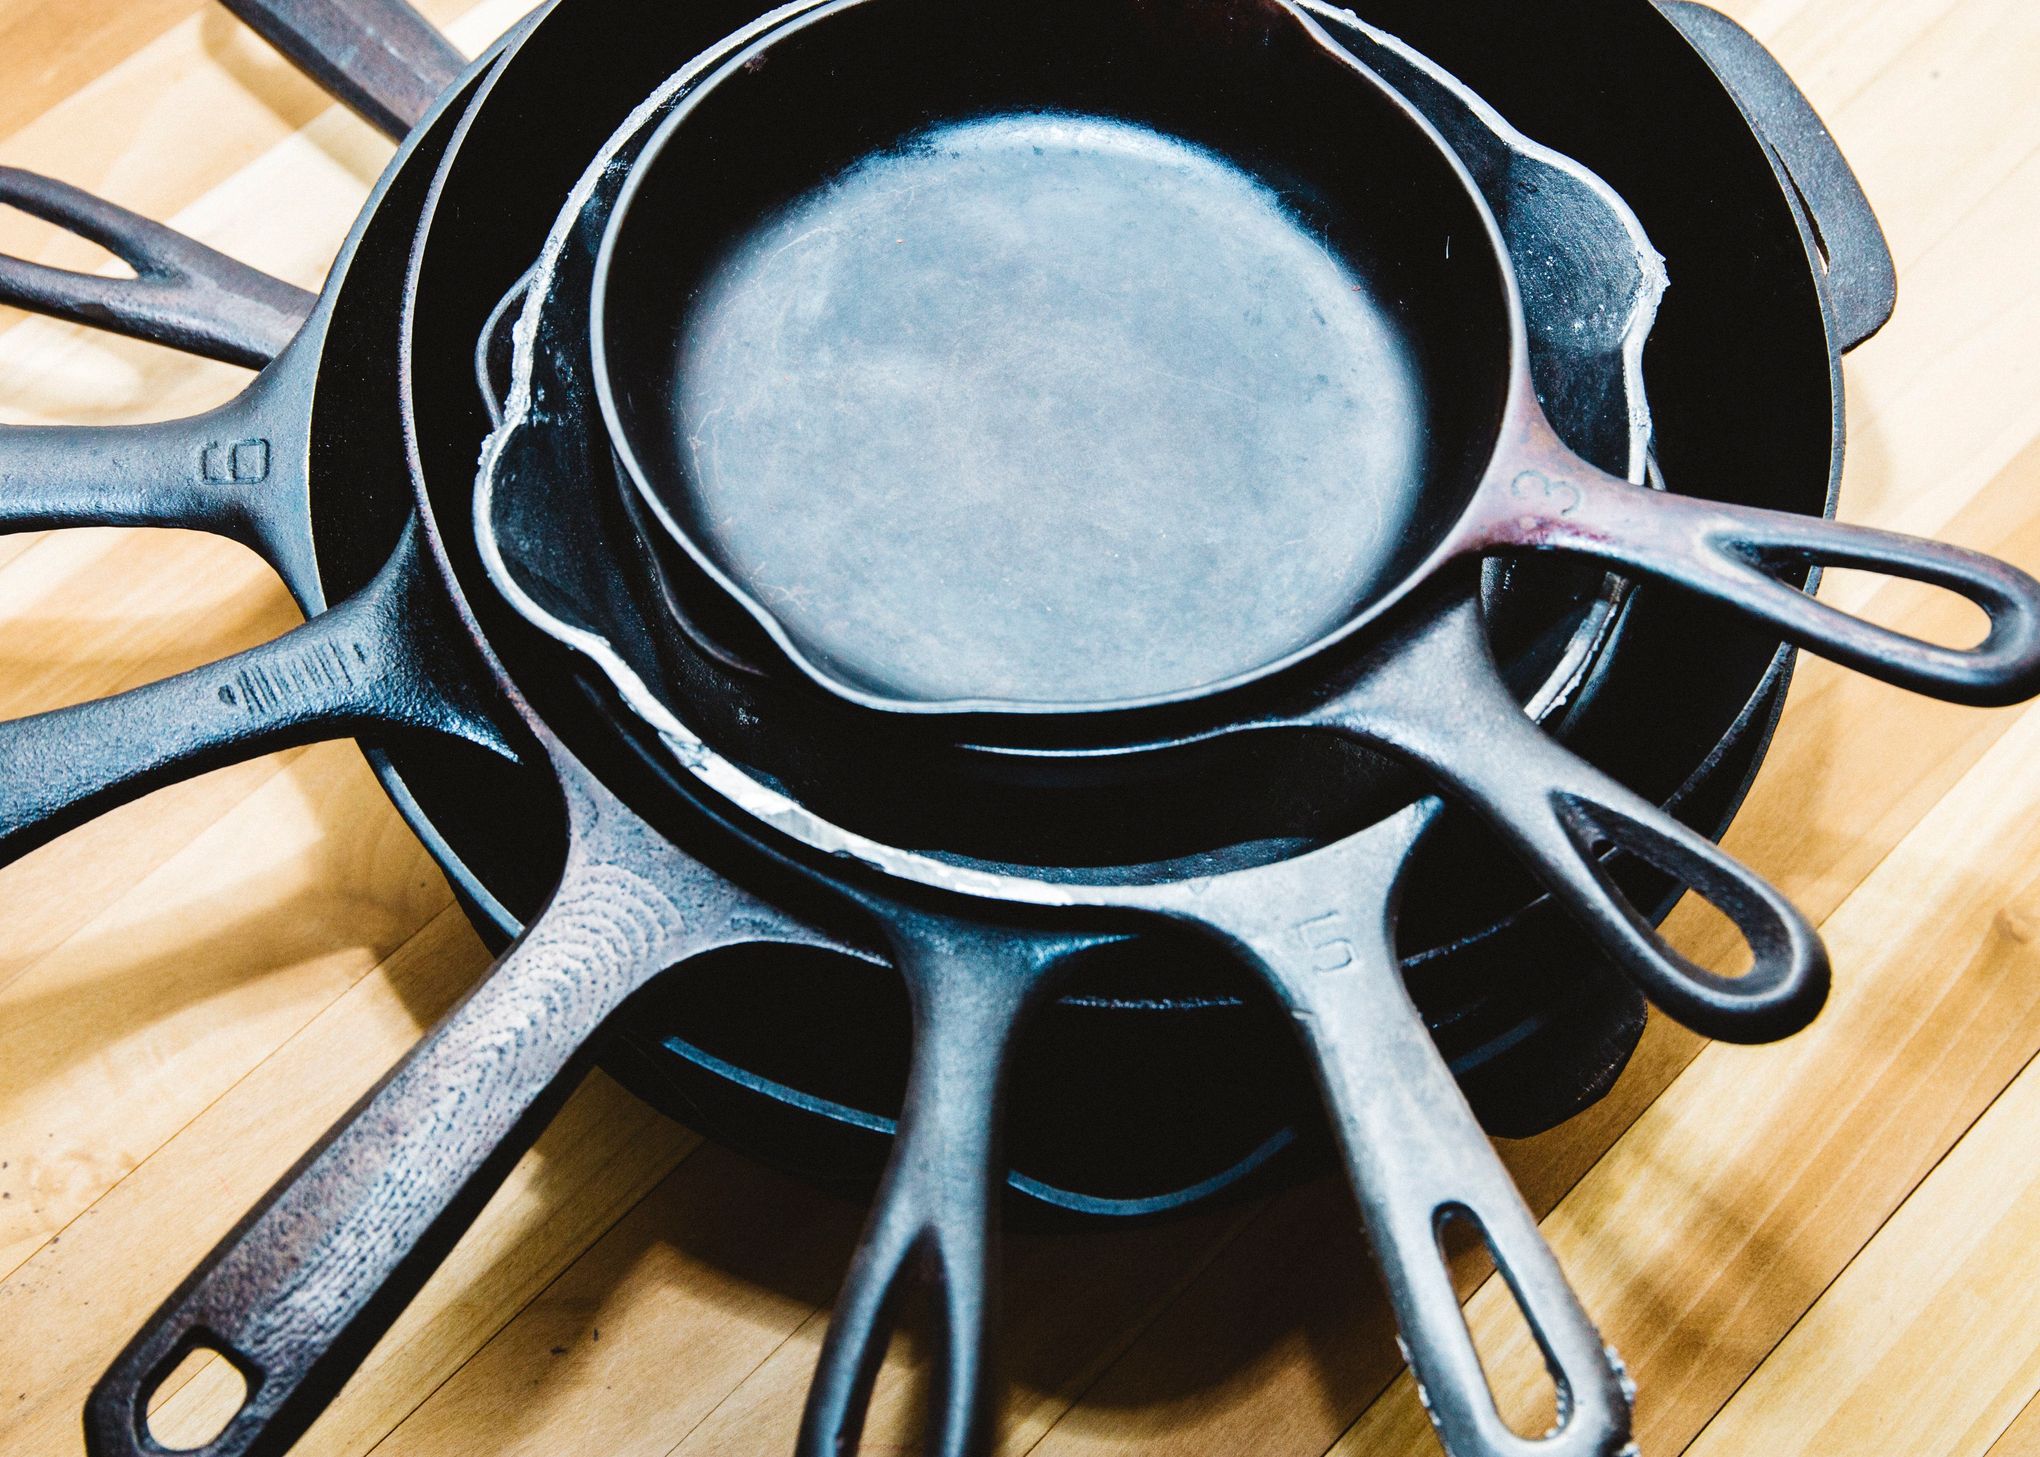 How to Make a Modern Cast-Iron Pan Smooth Like Antique Cookware